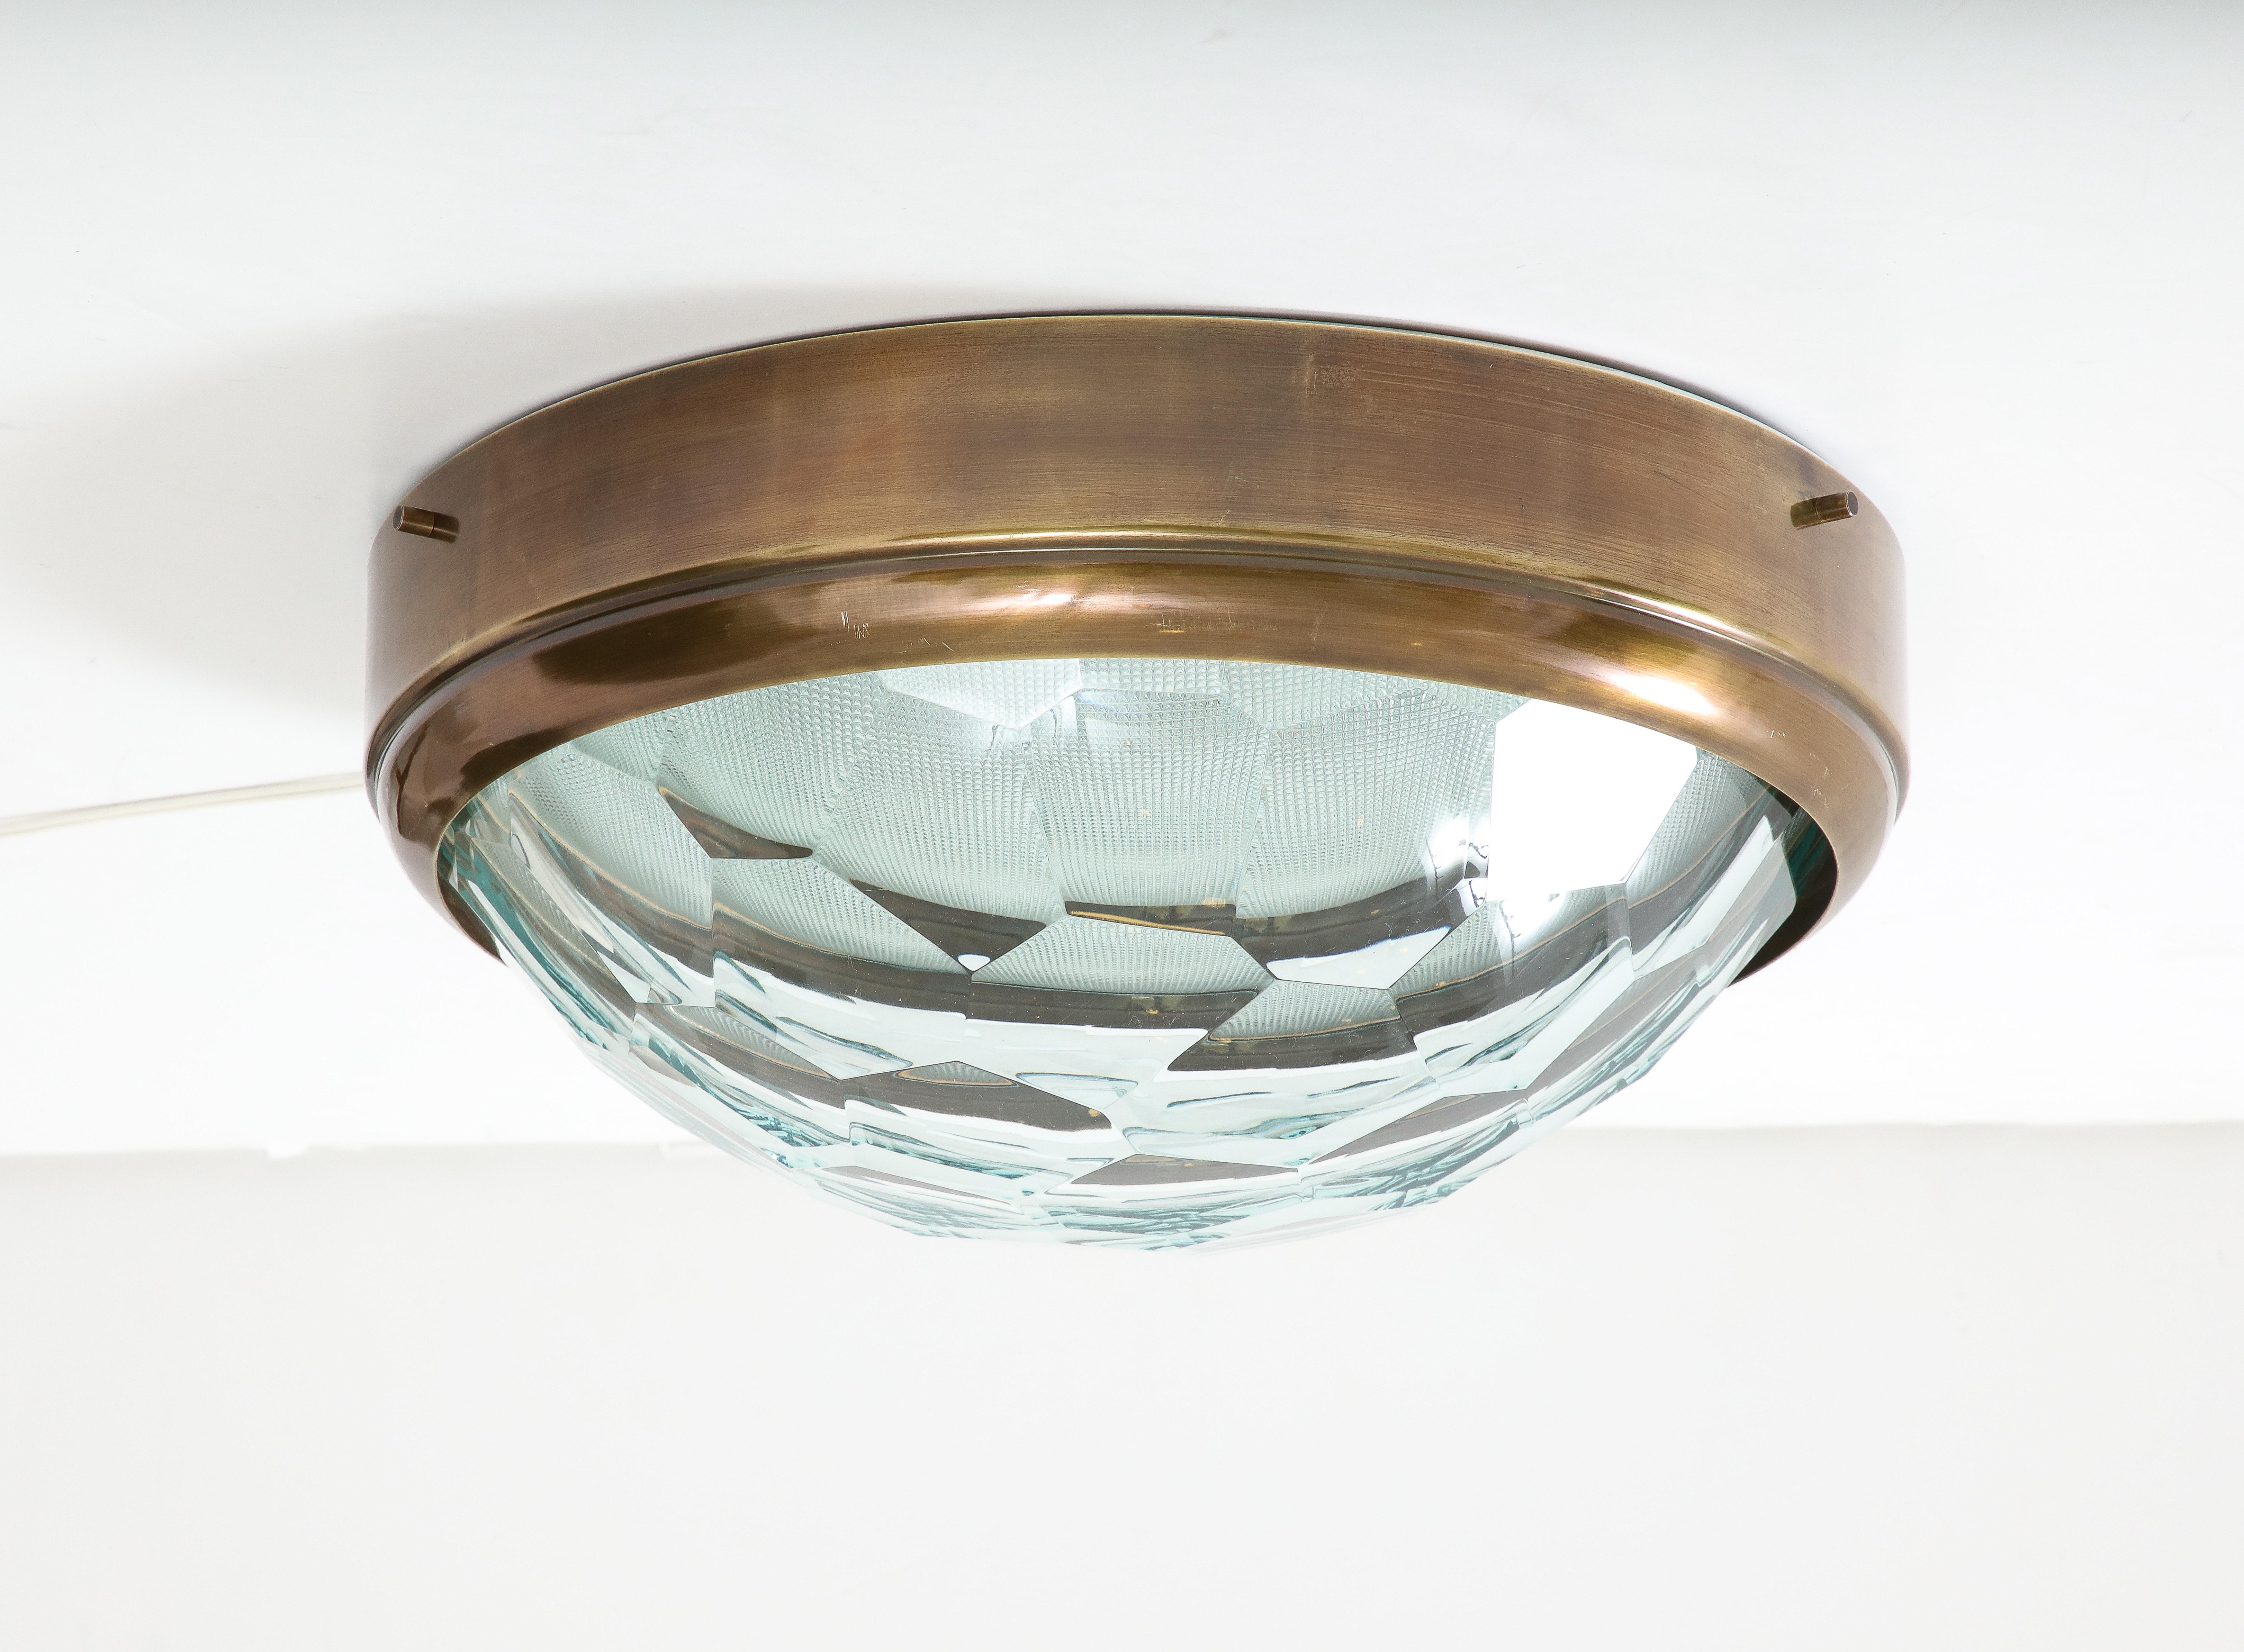 Brass Large Faceted Glass Flush Mount Ceiling Light in Style of Fontana Arte, 1960s For Sale